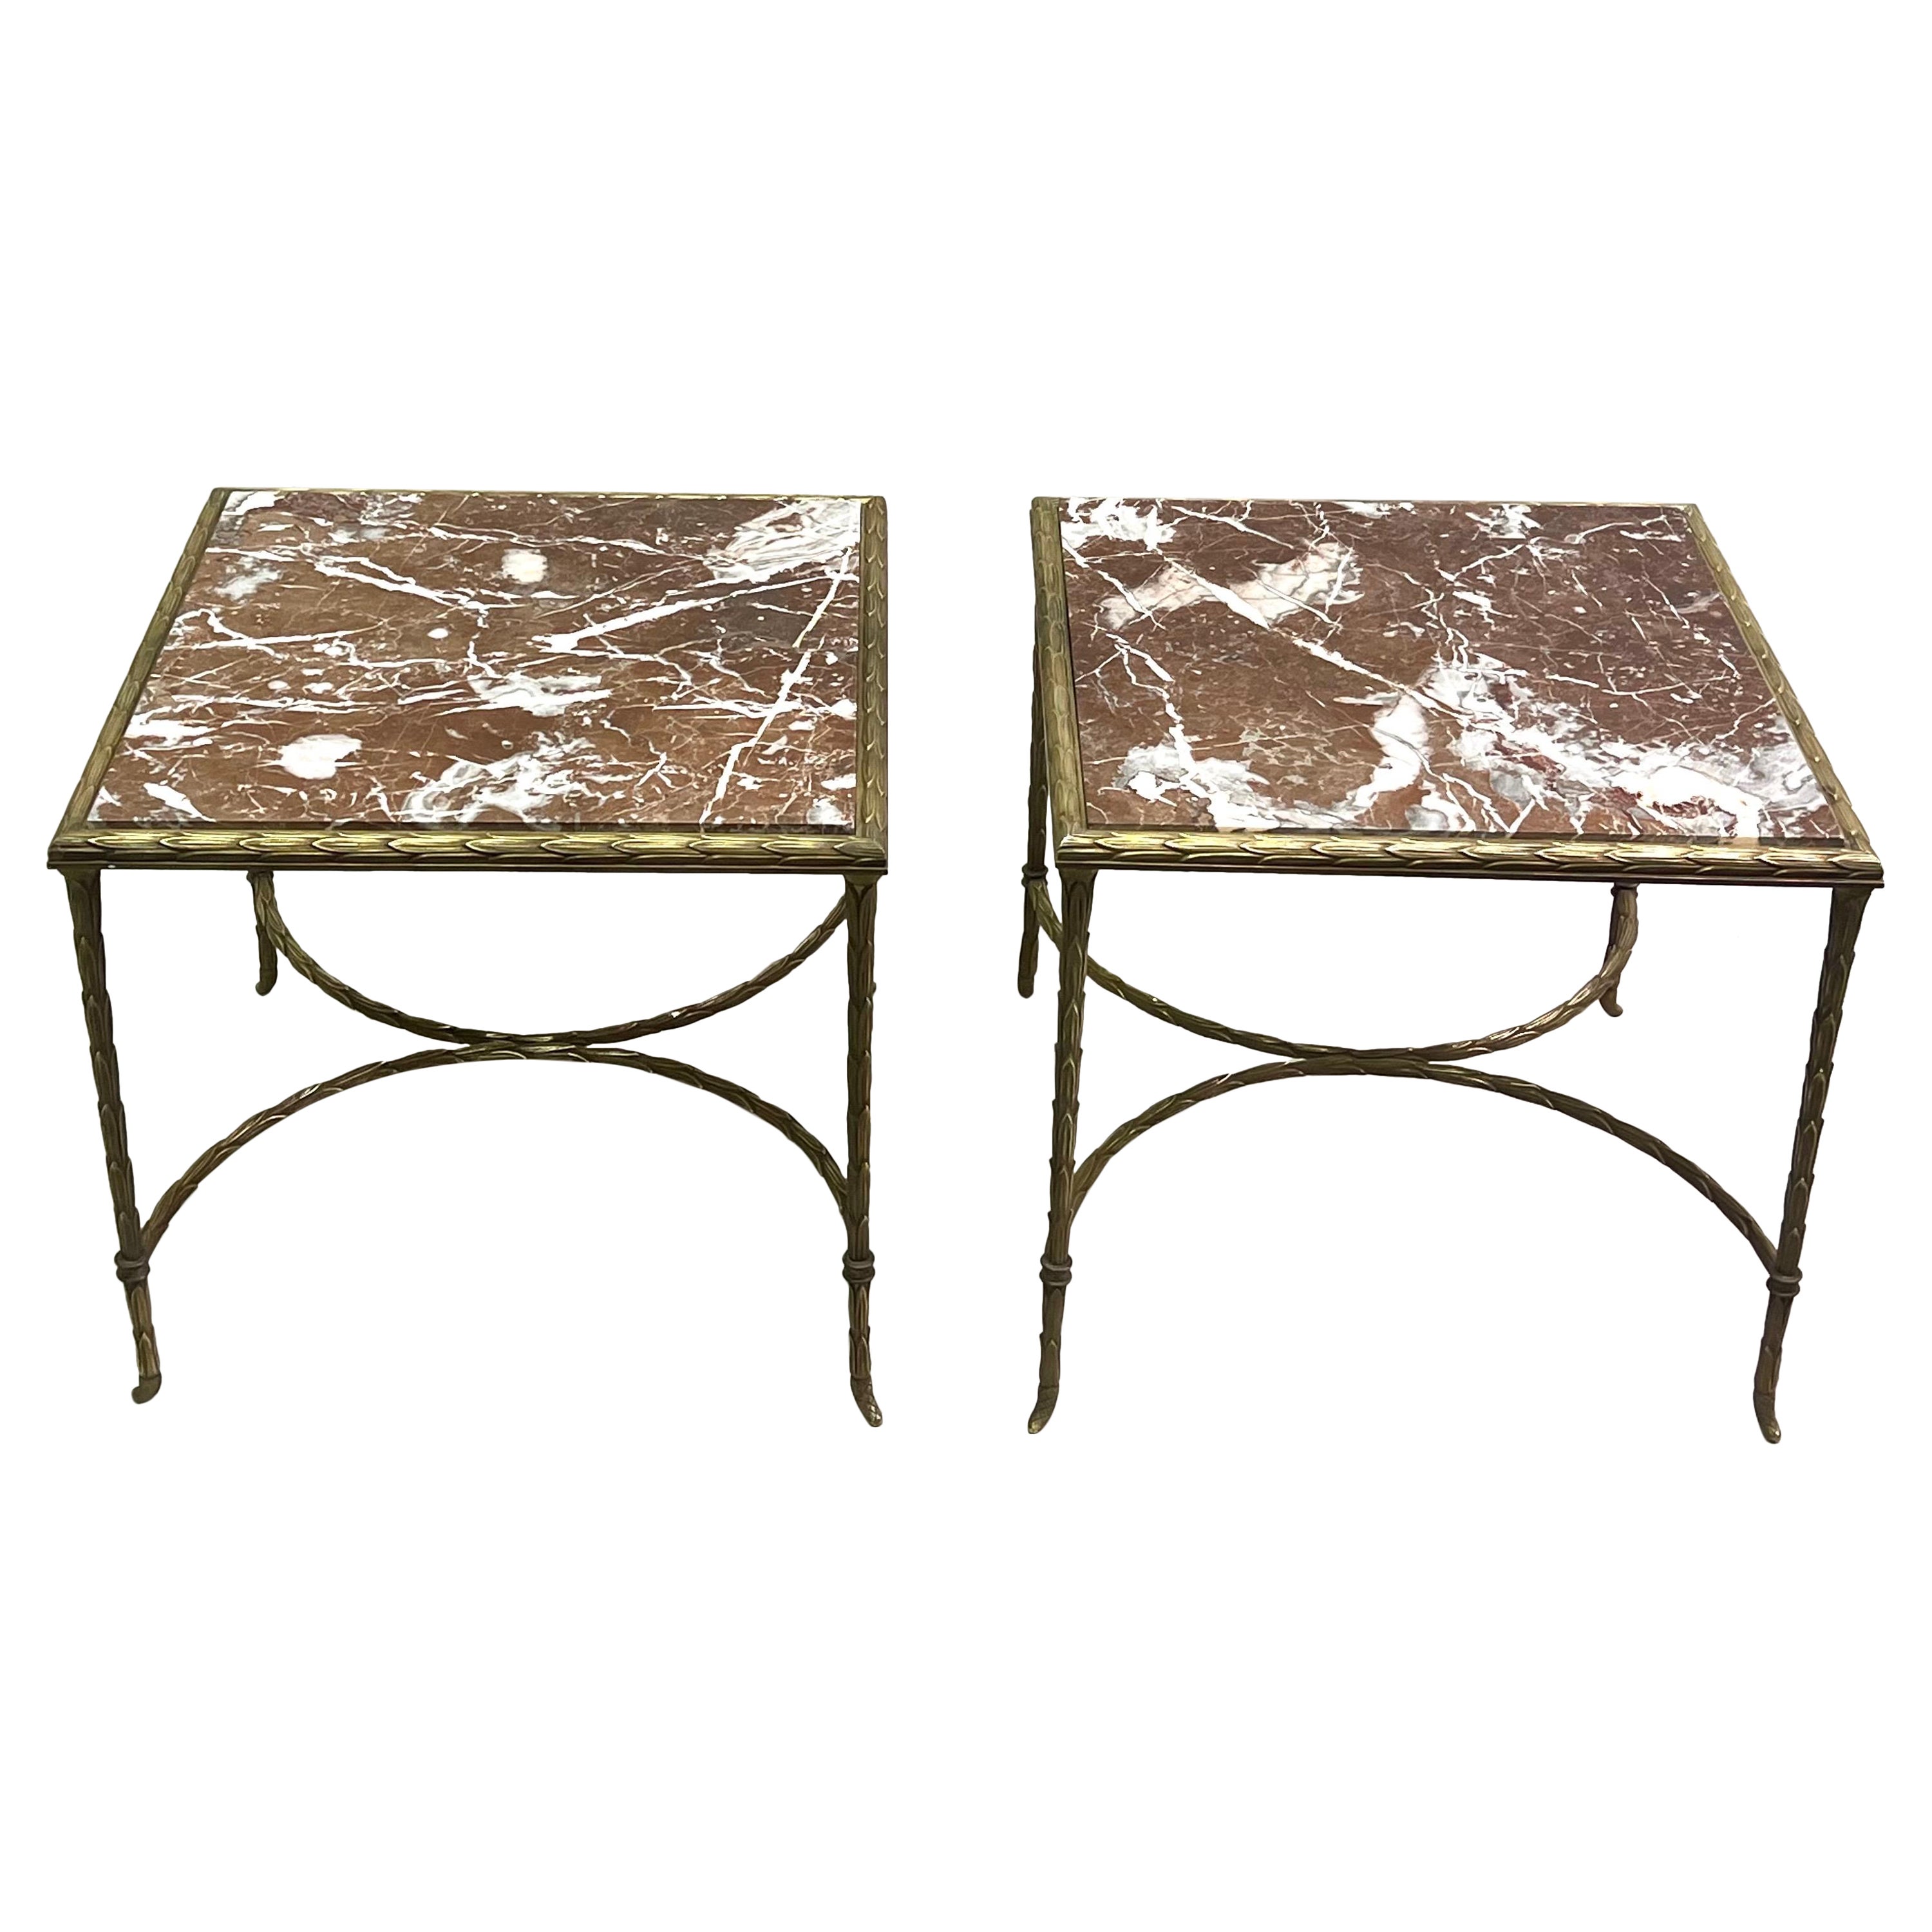 Pair of French Mid-Century Gilt Bronze Faux Bamboo Side Tables by Maison Bagues